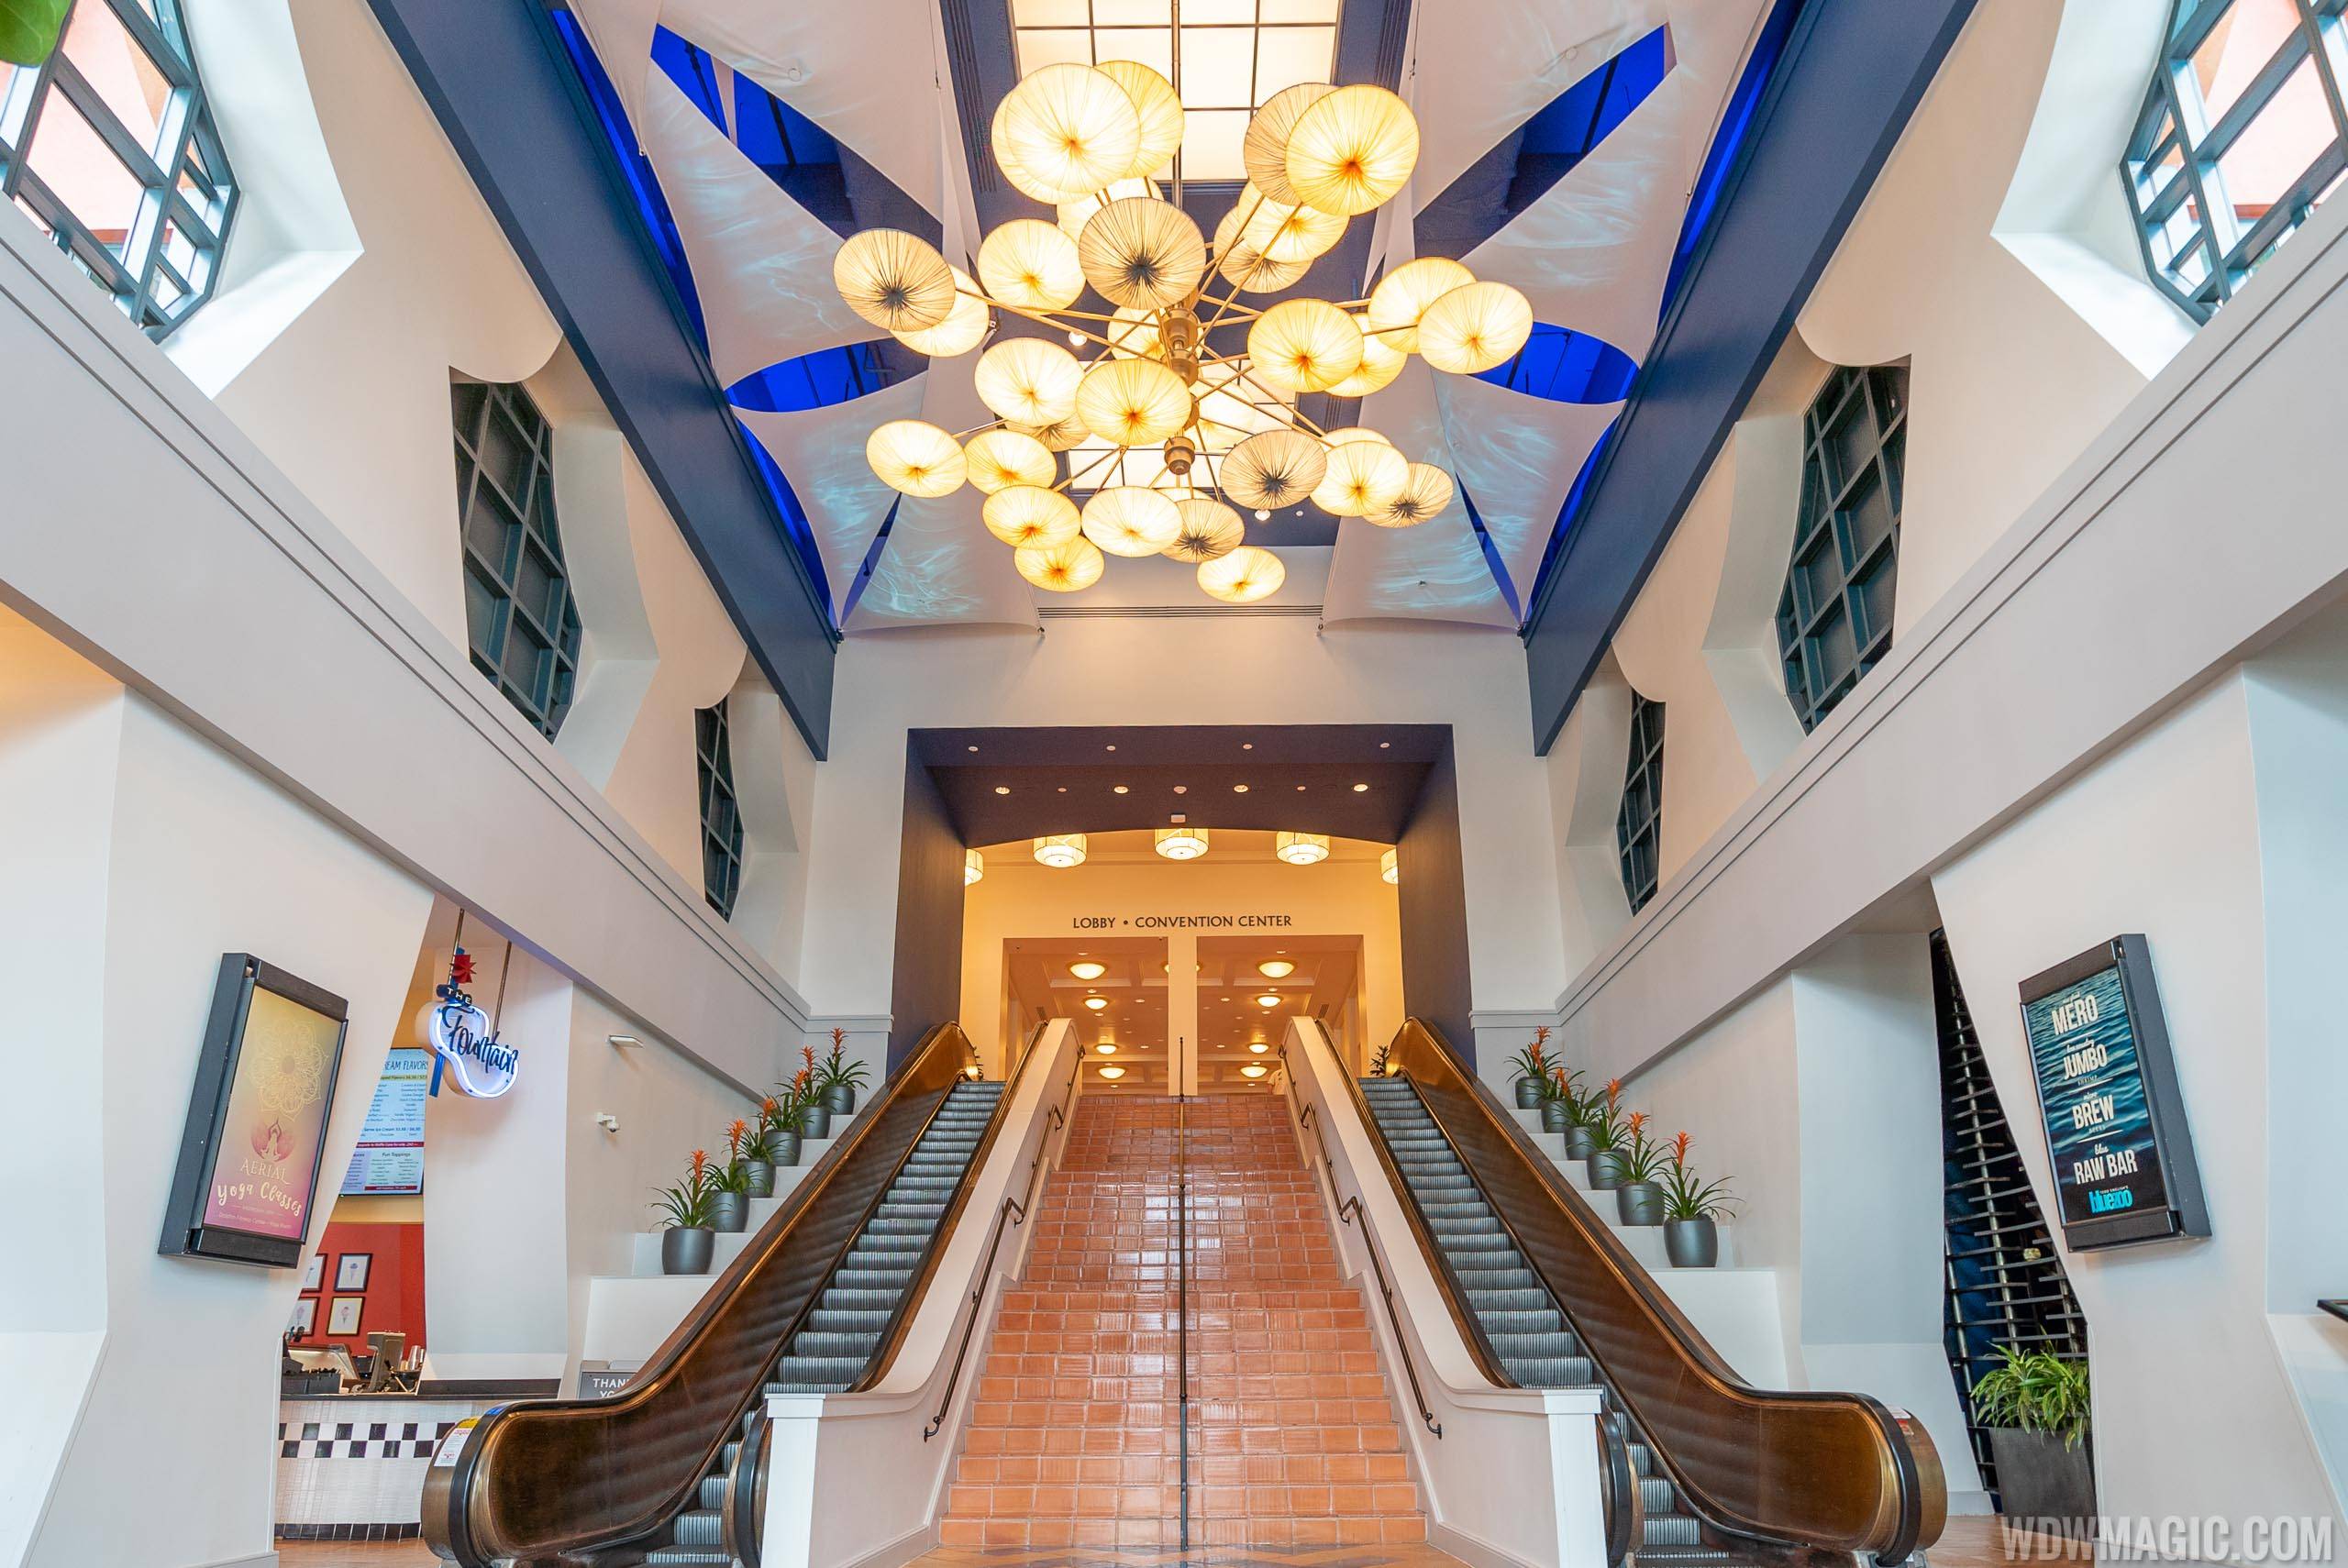 PHOTOS - A look at the recently refurbished entrance area at the Walt Disney World Dolphin Resort